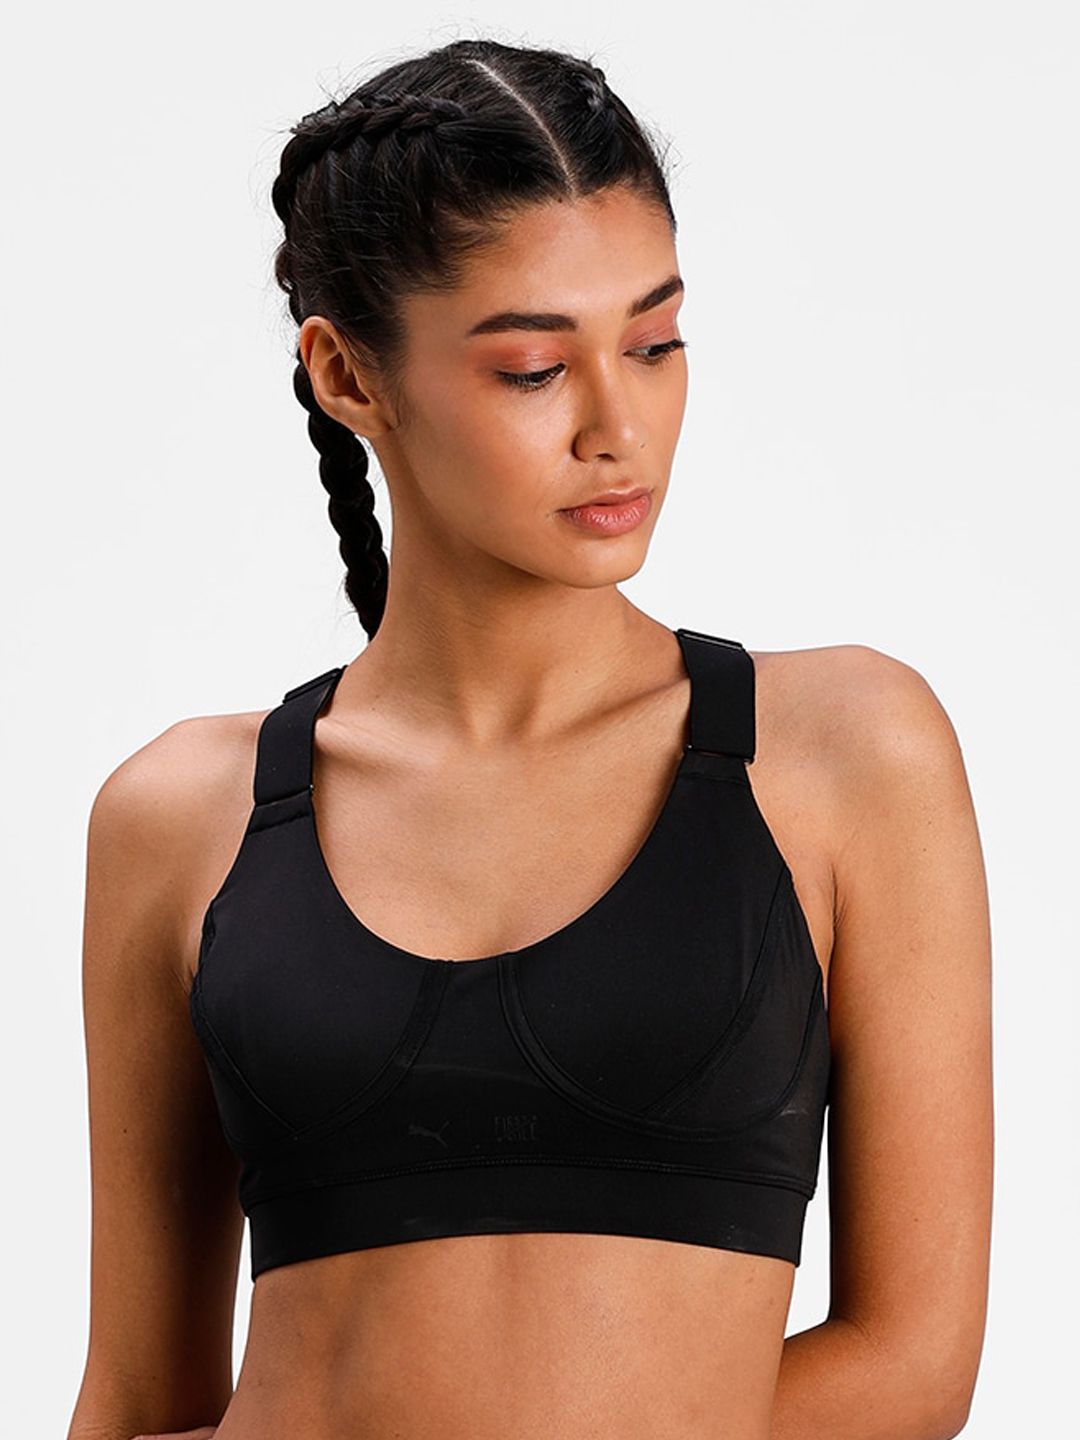 Puma Black Solid Non-Wired Lightly Padded Workout Bra 52025001 Price in India